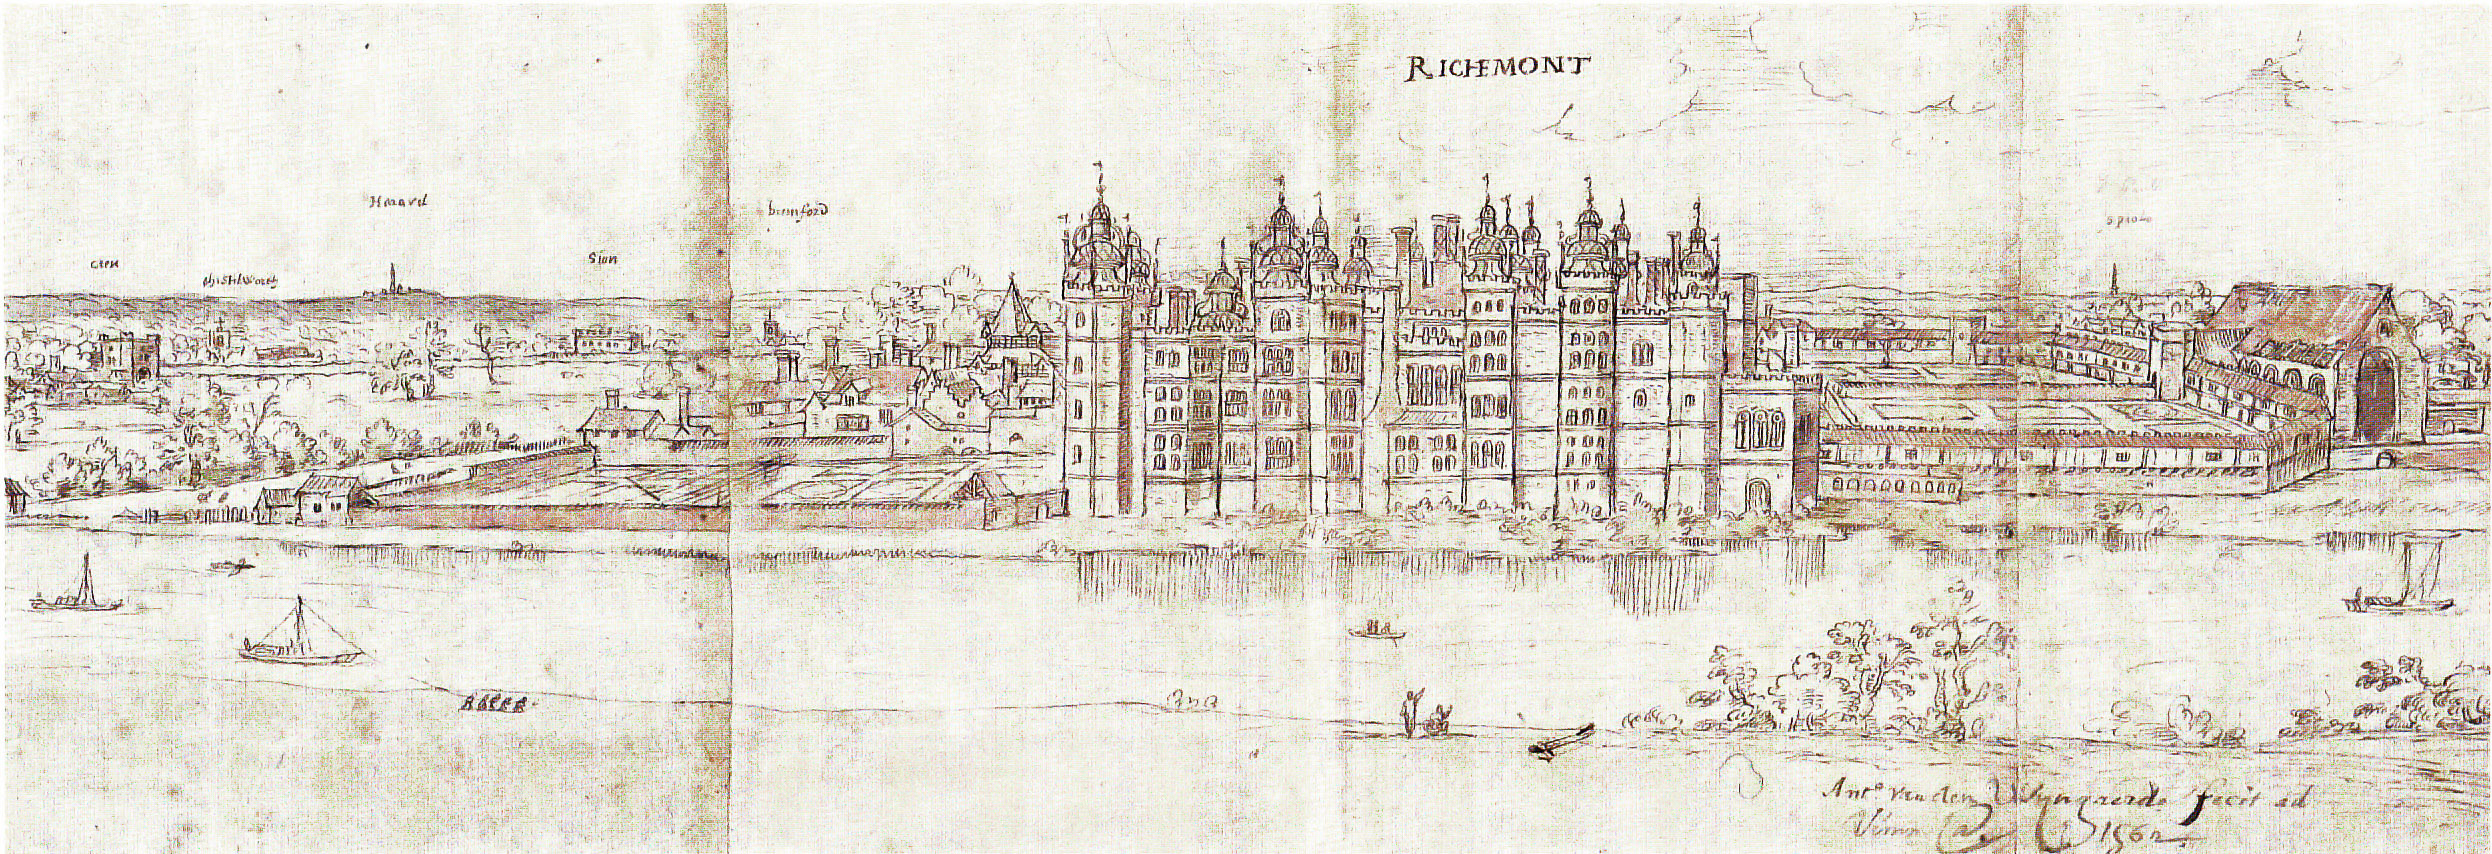 A drawing of Richmond Palace. From left there is a Great Kitchen with a pointed roof, main Palace Donjon, Galleried gardens, Ruined church of Friars Observant founded in 1502.